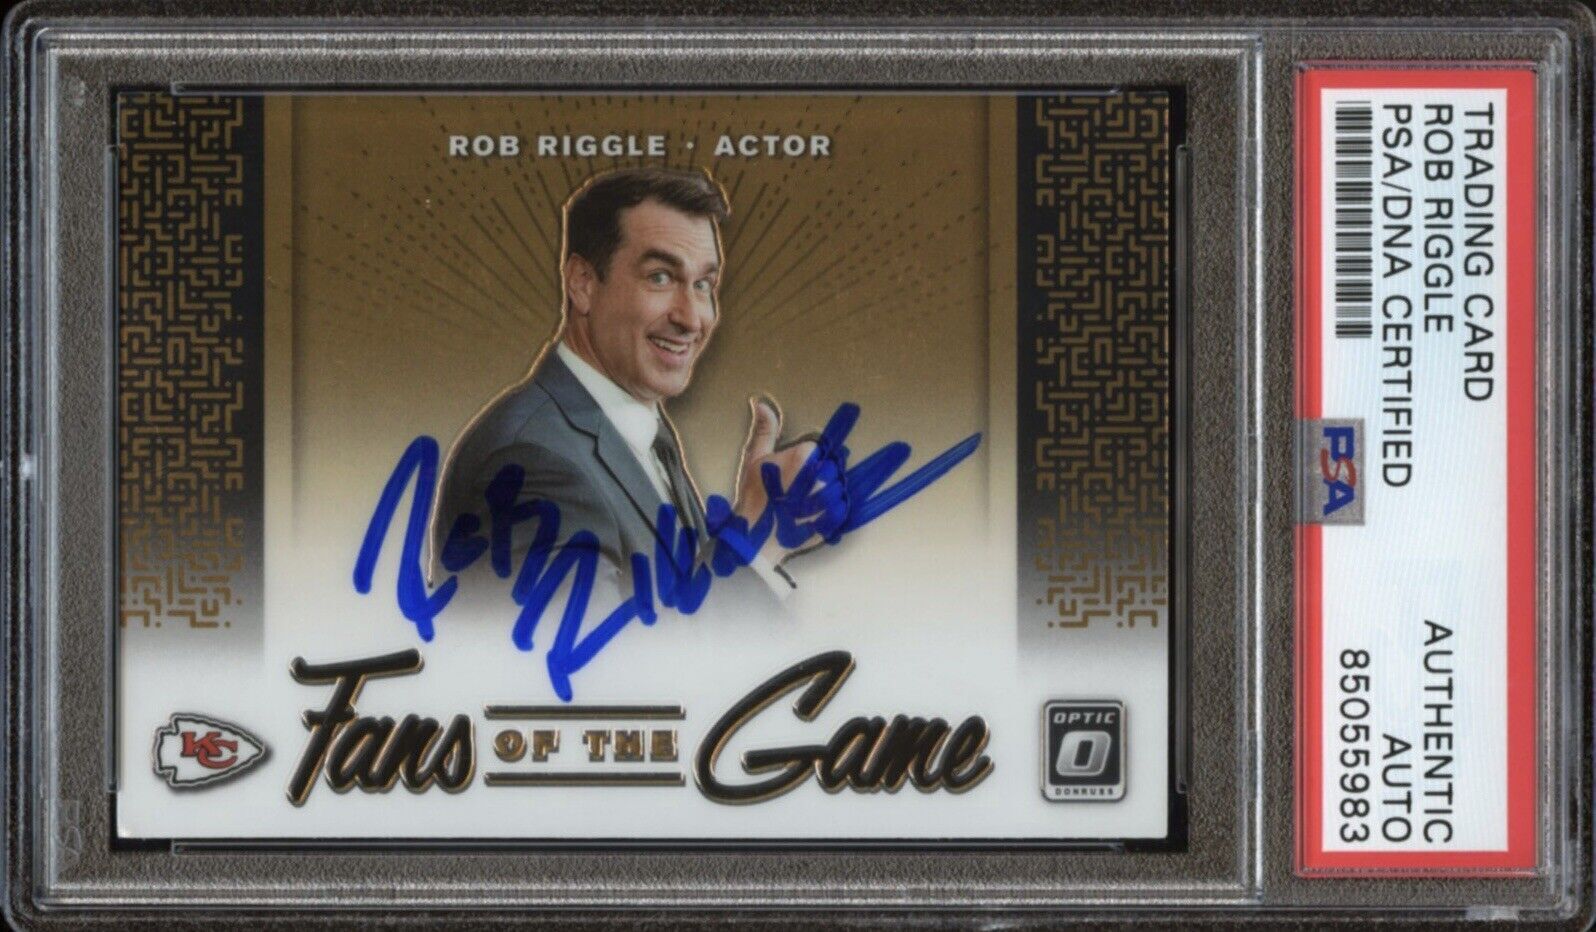 2019 Panini Donruss Fans Of The Game #FTG-2 Rob Riggle Auto PSA/DNA Authentic